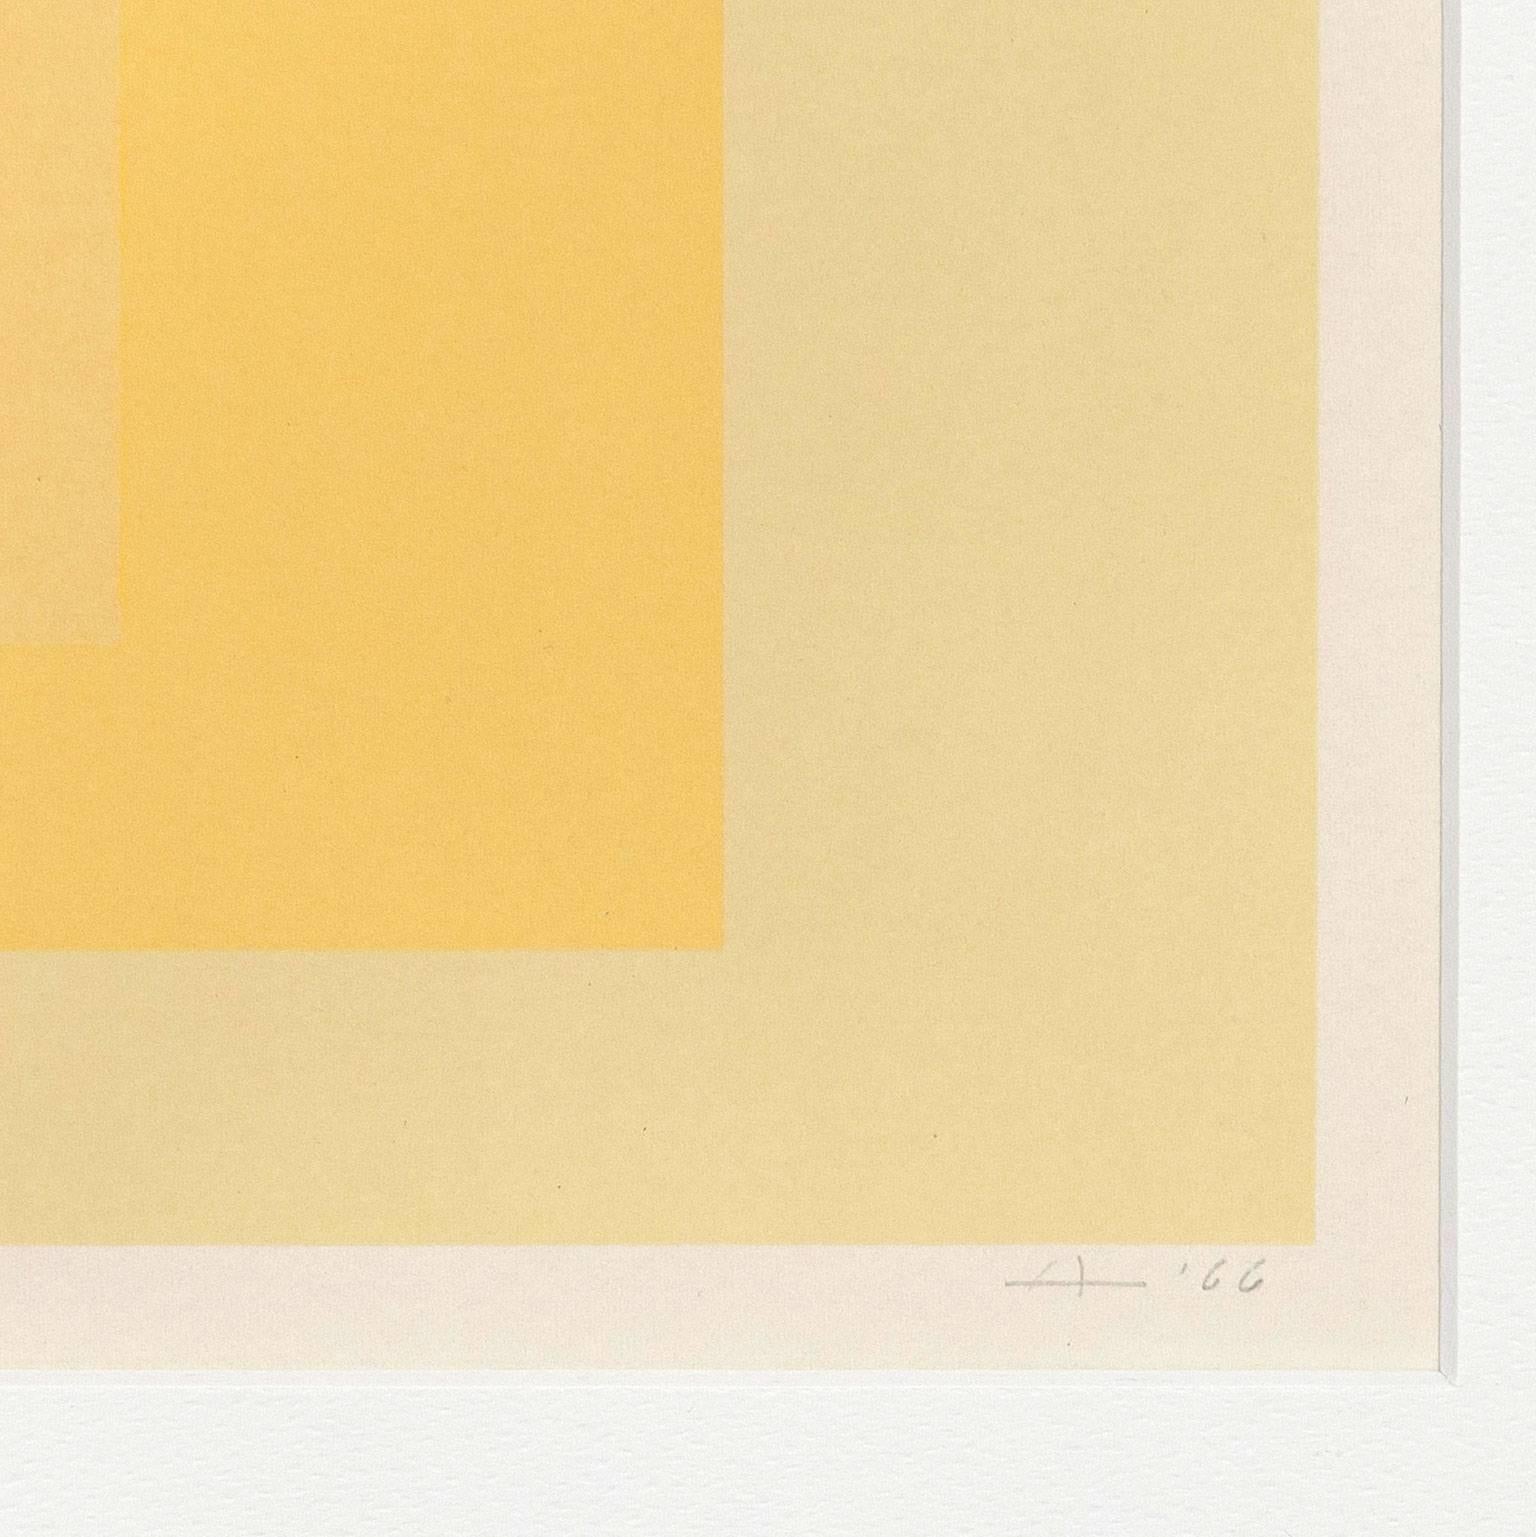 Josef Albers's (1888-1976) iconic explorations of color and form, especially his variations of "Homage to the Square", are arguably the most important and distinctive creation of 20th century abstraction. 

Albers's works are both the